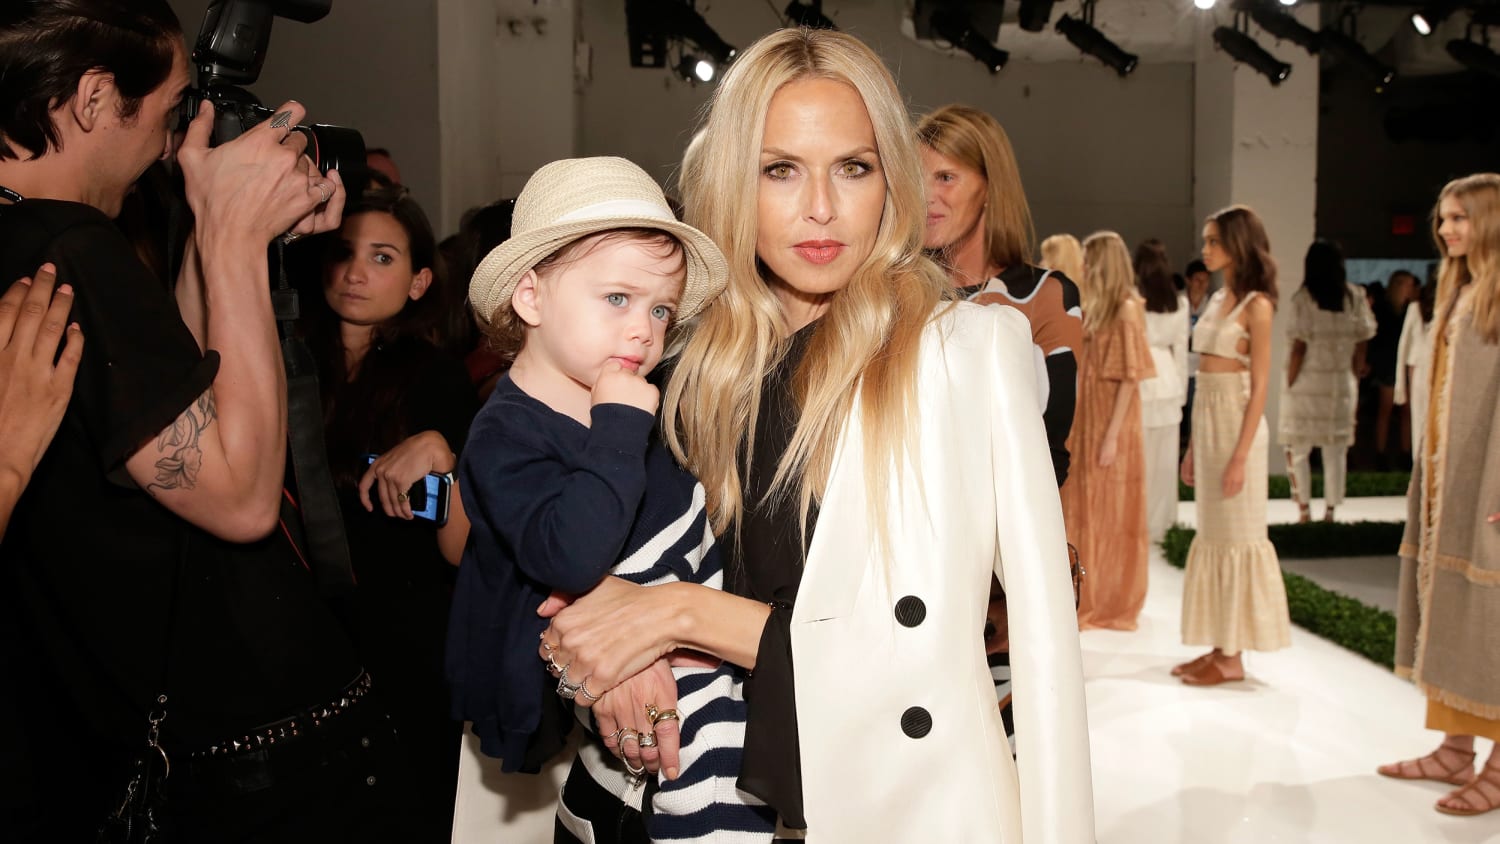 Rachel Zoe On Box Of Style And Spring Fashion Dos And Don'ts